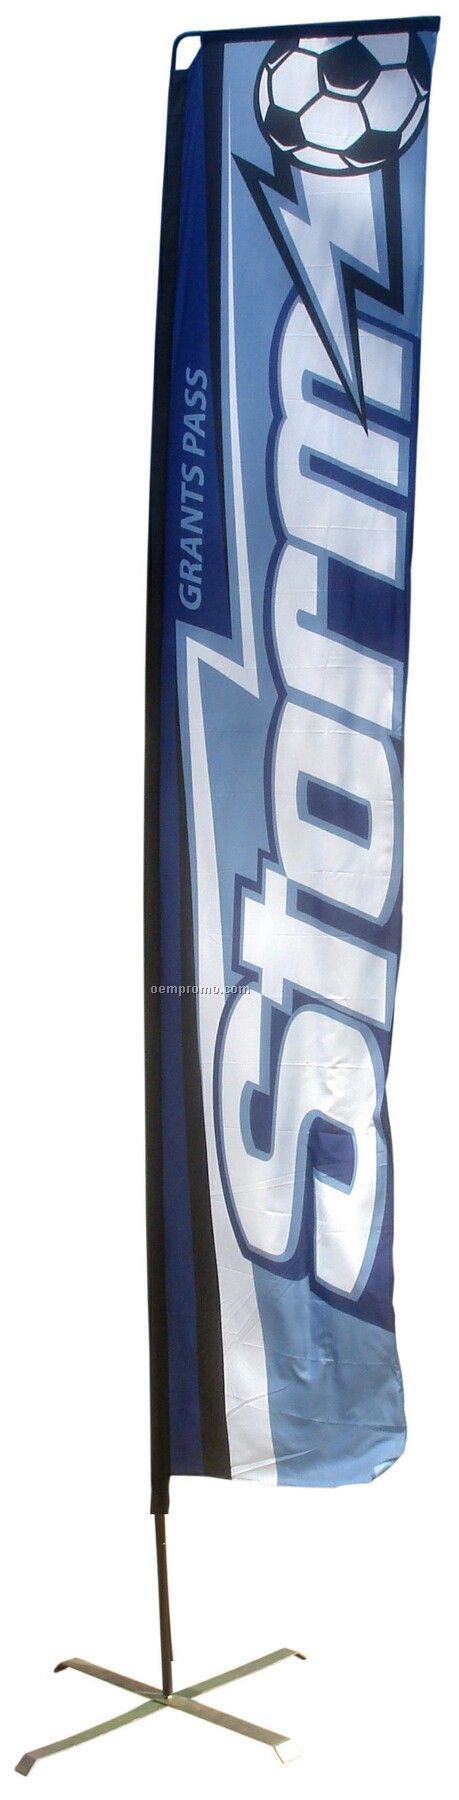 16' Double Sided Flag Banner System (Spot Color)